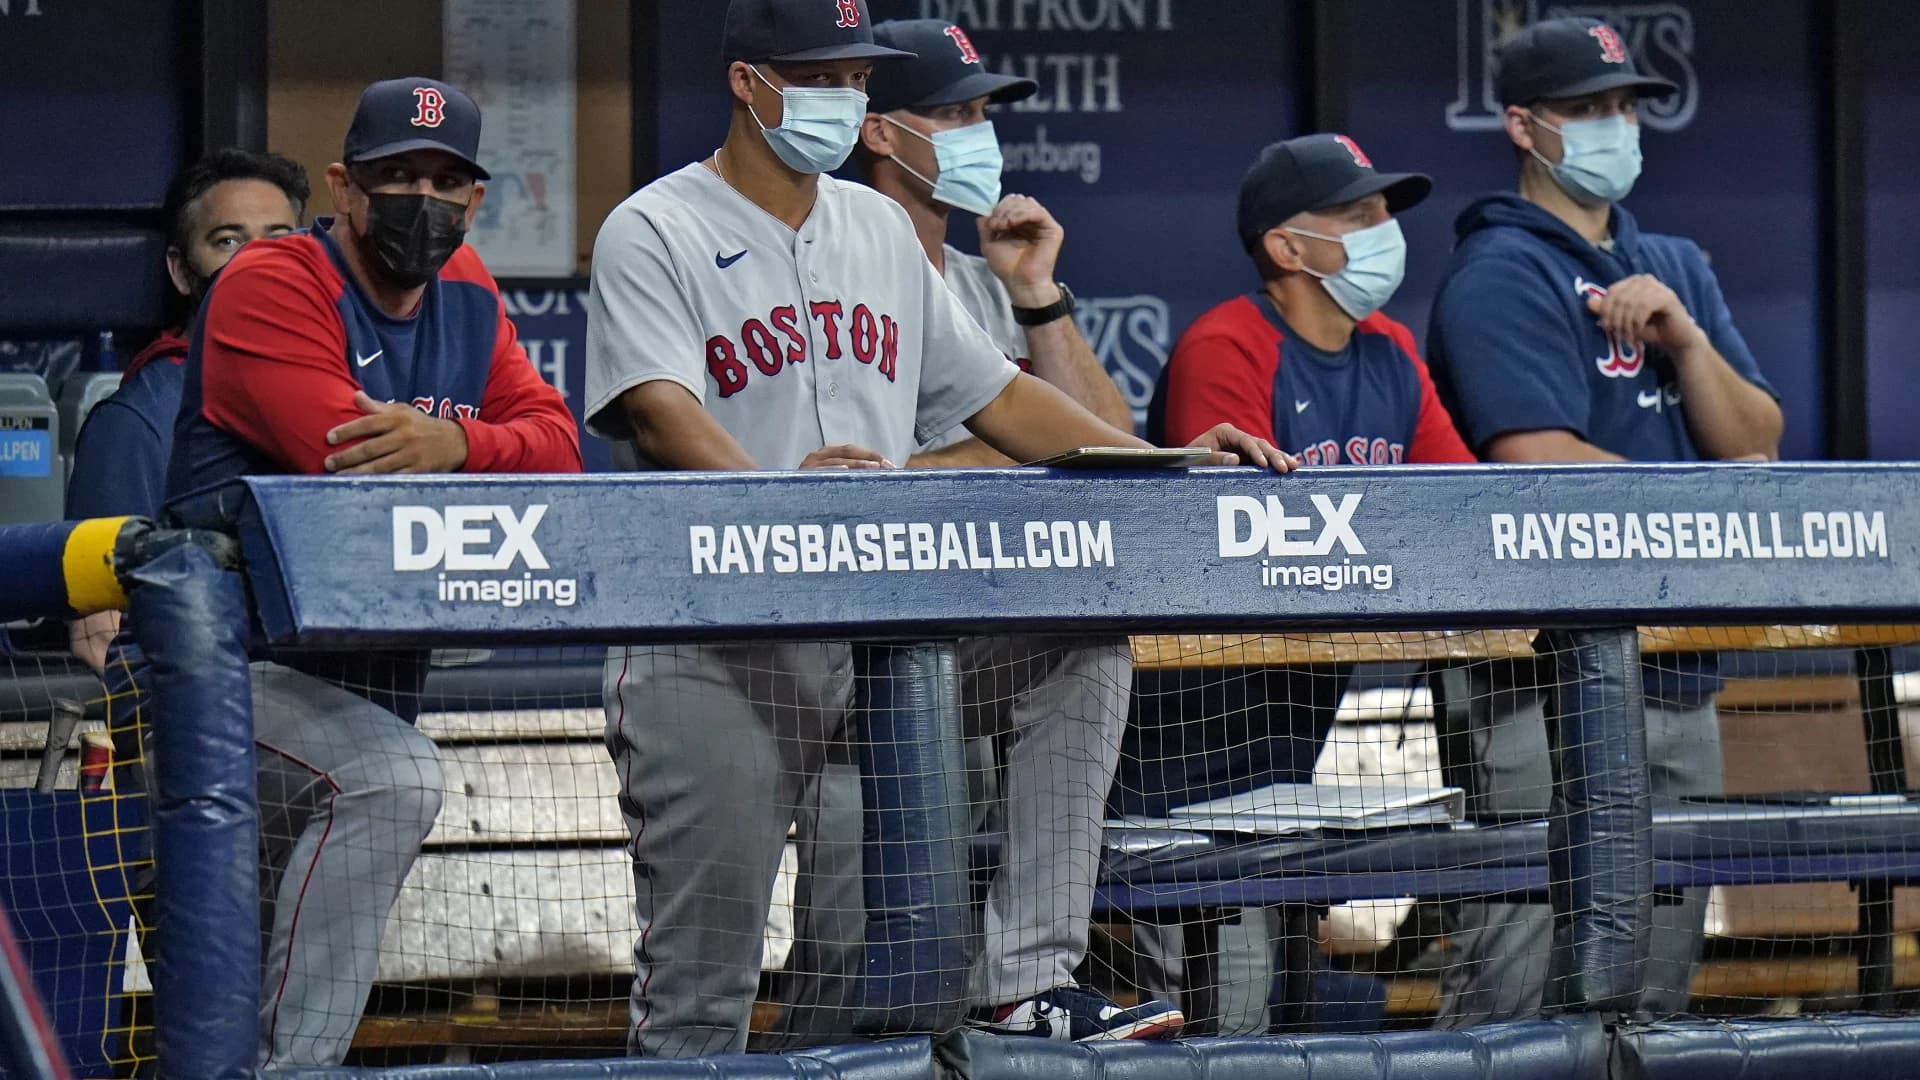 MLB drops regular COVID tests, can move games for health